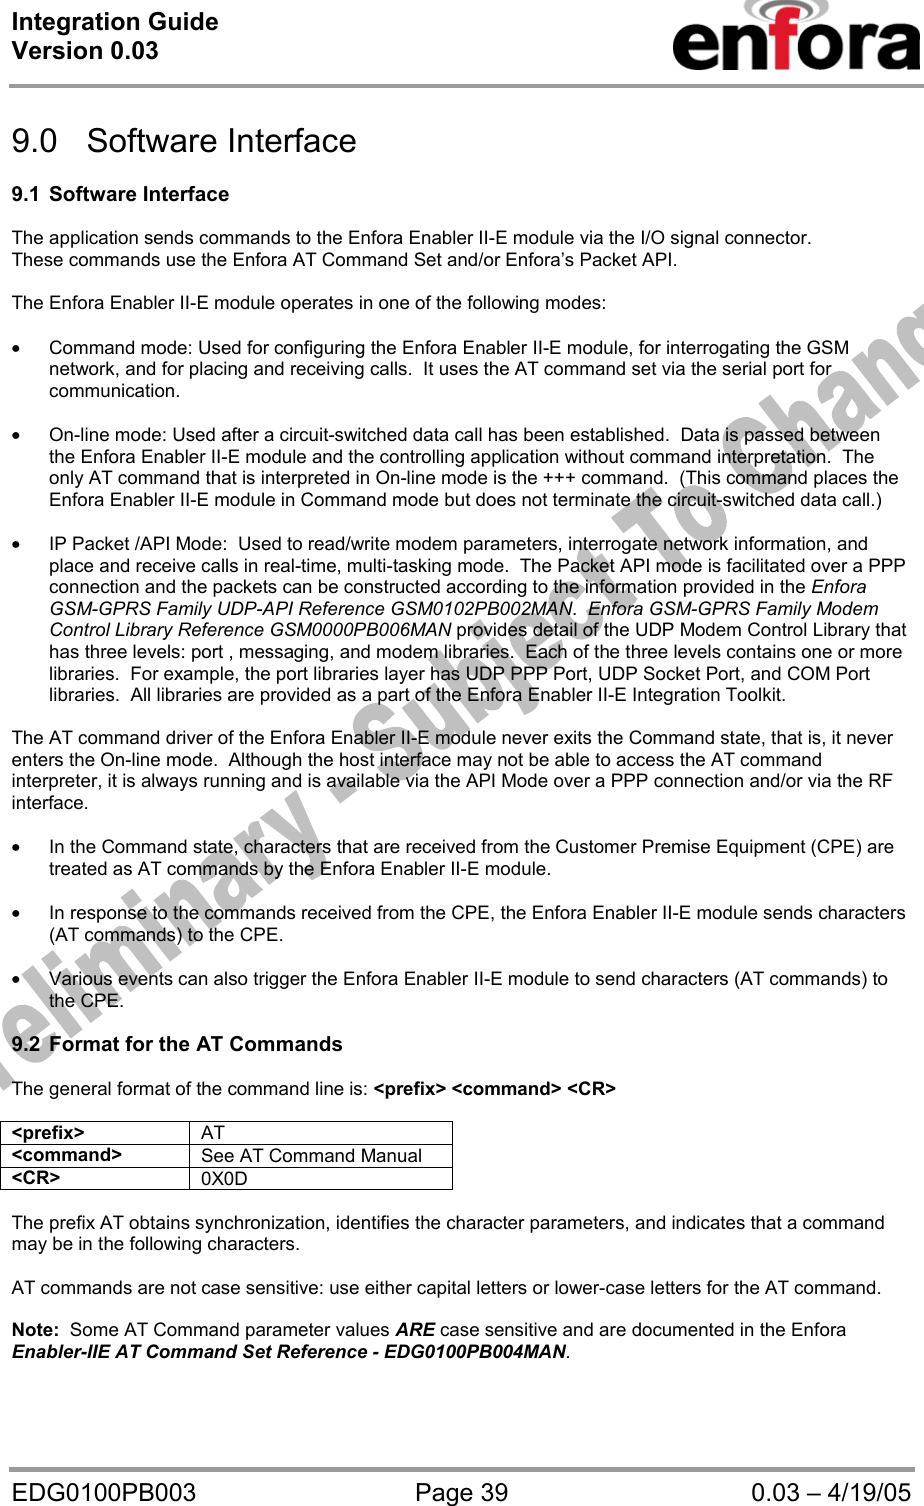 Integration Guide  Version 0.03   EDG0100PB003  Page 39  0.03 – 4/19/05  9.0 Software Interface  9.1 Software Interface  The application sends commands to the Enfora Enabler II-E module via the I/O signal connector. These commands use the Enfora AT Command Set and/or Enfora’s Packet API.       The Enfora Enabler II-E module operates in one of the following modes:  • Command mode: Used for configuring the Enfora Enabler II-E module, for interrogating the GSM network, and for placing and receiving calls.  It uses the AT command set via the serial port for communication.  • On-line mode: Used after a circuit-switched data call has been established.  Data is passed between the Enfora Enabler II-E module and the controlling application without command interpretation.  The only AT command that is interpreted in On-line mode is the +++ command.  (This command places the Enfora Enabler II-E module in Command mode but does not terminate the circuit-switched data call.)  • IP Packet /API Mode:  Used to read/write modem parameters, interrogate network information, and place and receive calls in real-time, multi-tasking mode.  The Packet API mode is facilitated over a PPP connection and the packets can be constructed according to the information provided in the Enfora GSM-GPRS Family UDP-API Reference GSM0102PB002MAN.  Enfora GSM-GPRS Family Modem Control Library Reference GSM0000PB006MAN provides detail of the UDP Modem Control Library that has three levels: port , messaging, and modem libraries.  Each of the three levels contains one or more libraries.  For example, the port libraries layer has UDP PPP Port, UDP Socket Port, and COM Port libraries.  All libraries are provided as a part of the Enfora Enabler II-E Integration Toolkit.  The AT command driver of the Enfora Enabler II-E module never exits the Command state, that is, it never enters the On-line mode.  Although the host interface may not be able to access the AT command interpreter, it is always running and is available via the API Mode over a PPP connection and/or via the RF interface.  • In the Command state, characters that are received from the Customer Premise Equipment (CPE) are treated as AT commands by the Enfora Enabler II-E module.  • In response to the commands received from the CPE, the Enfora Enabler II-E module sends characters (AT commands) to the CPE.  • Various events can also trigger the Enfora Enabler II-E module to send characters (AT commands) to the CPE.  9.2  Format for the AT Commands  The general format of the command line is: &lt;prefix&gt; &lt;command&gt; &lt;CR&gt;  &lt;prefix&gt;  AT &lt;command&gt;  See AT Command Manual &lt;CR&gt;  0X0D  The prefix AT obtains synchronization, identifies the character parameters, and indicates that a command may be in the following characters.  AT commands are not case sensitive: use either capital letters or lower-case letters for the AT command.    Note:  Some AT Command parameter values ARE case sensitive and are documented in the Enfora Enabler-IIE AT Command Set Reference - EDG0100PB004MAN. 